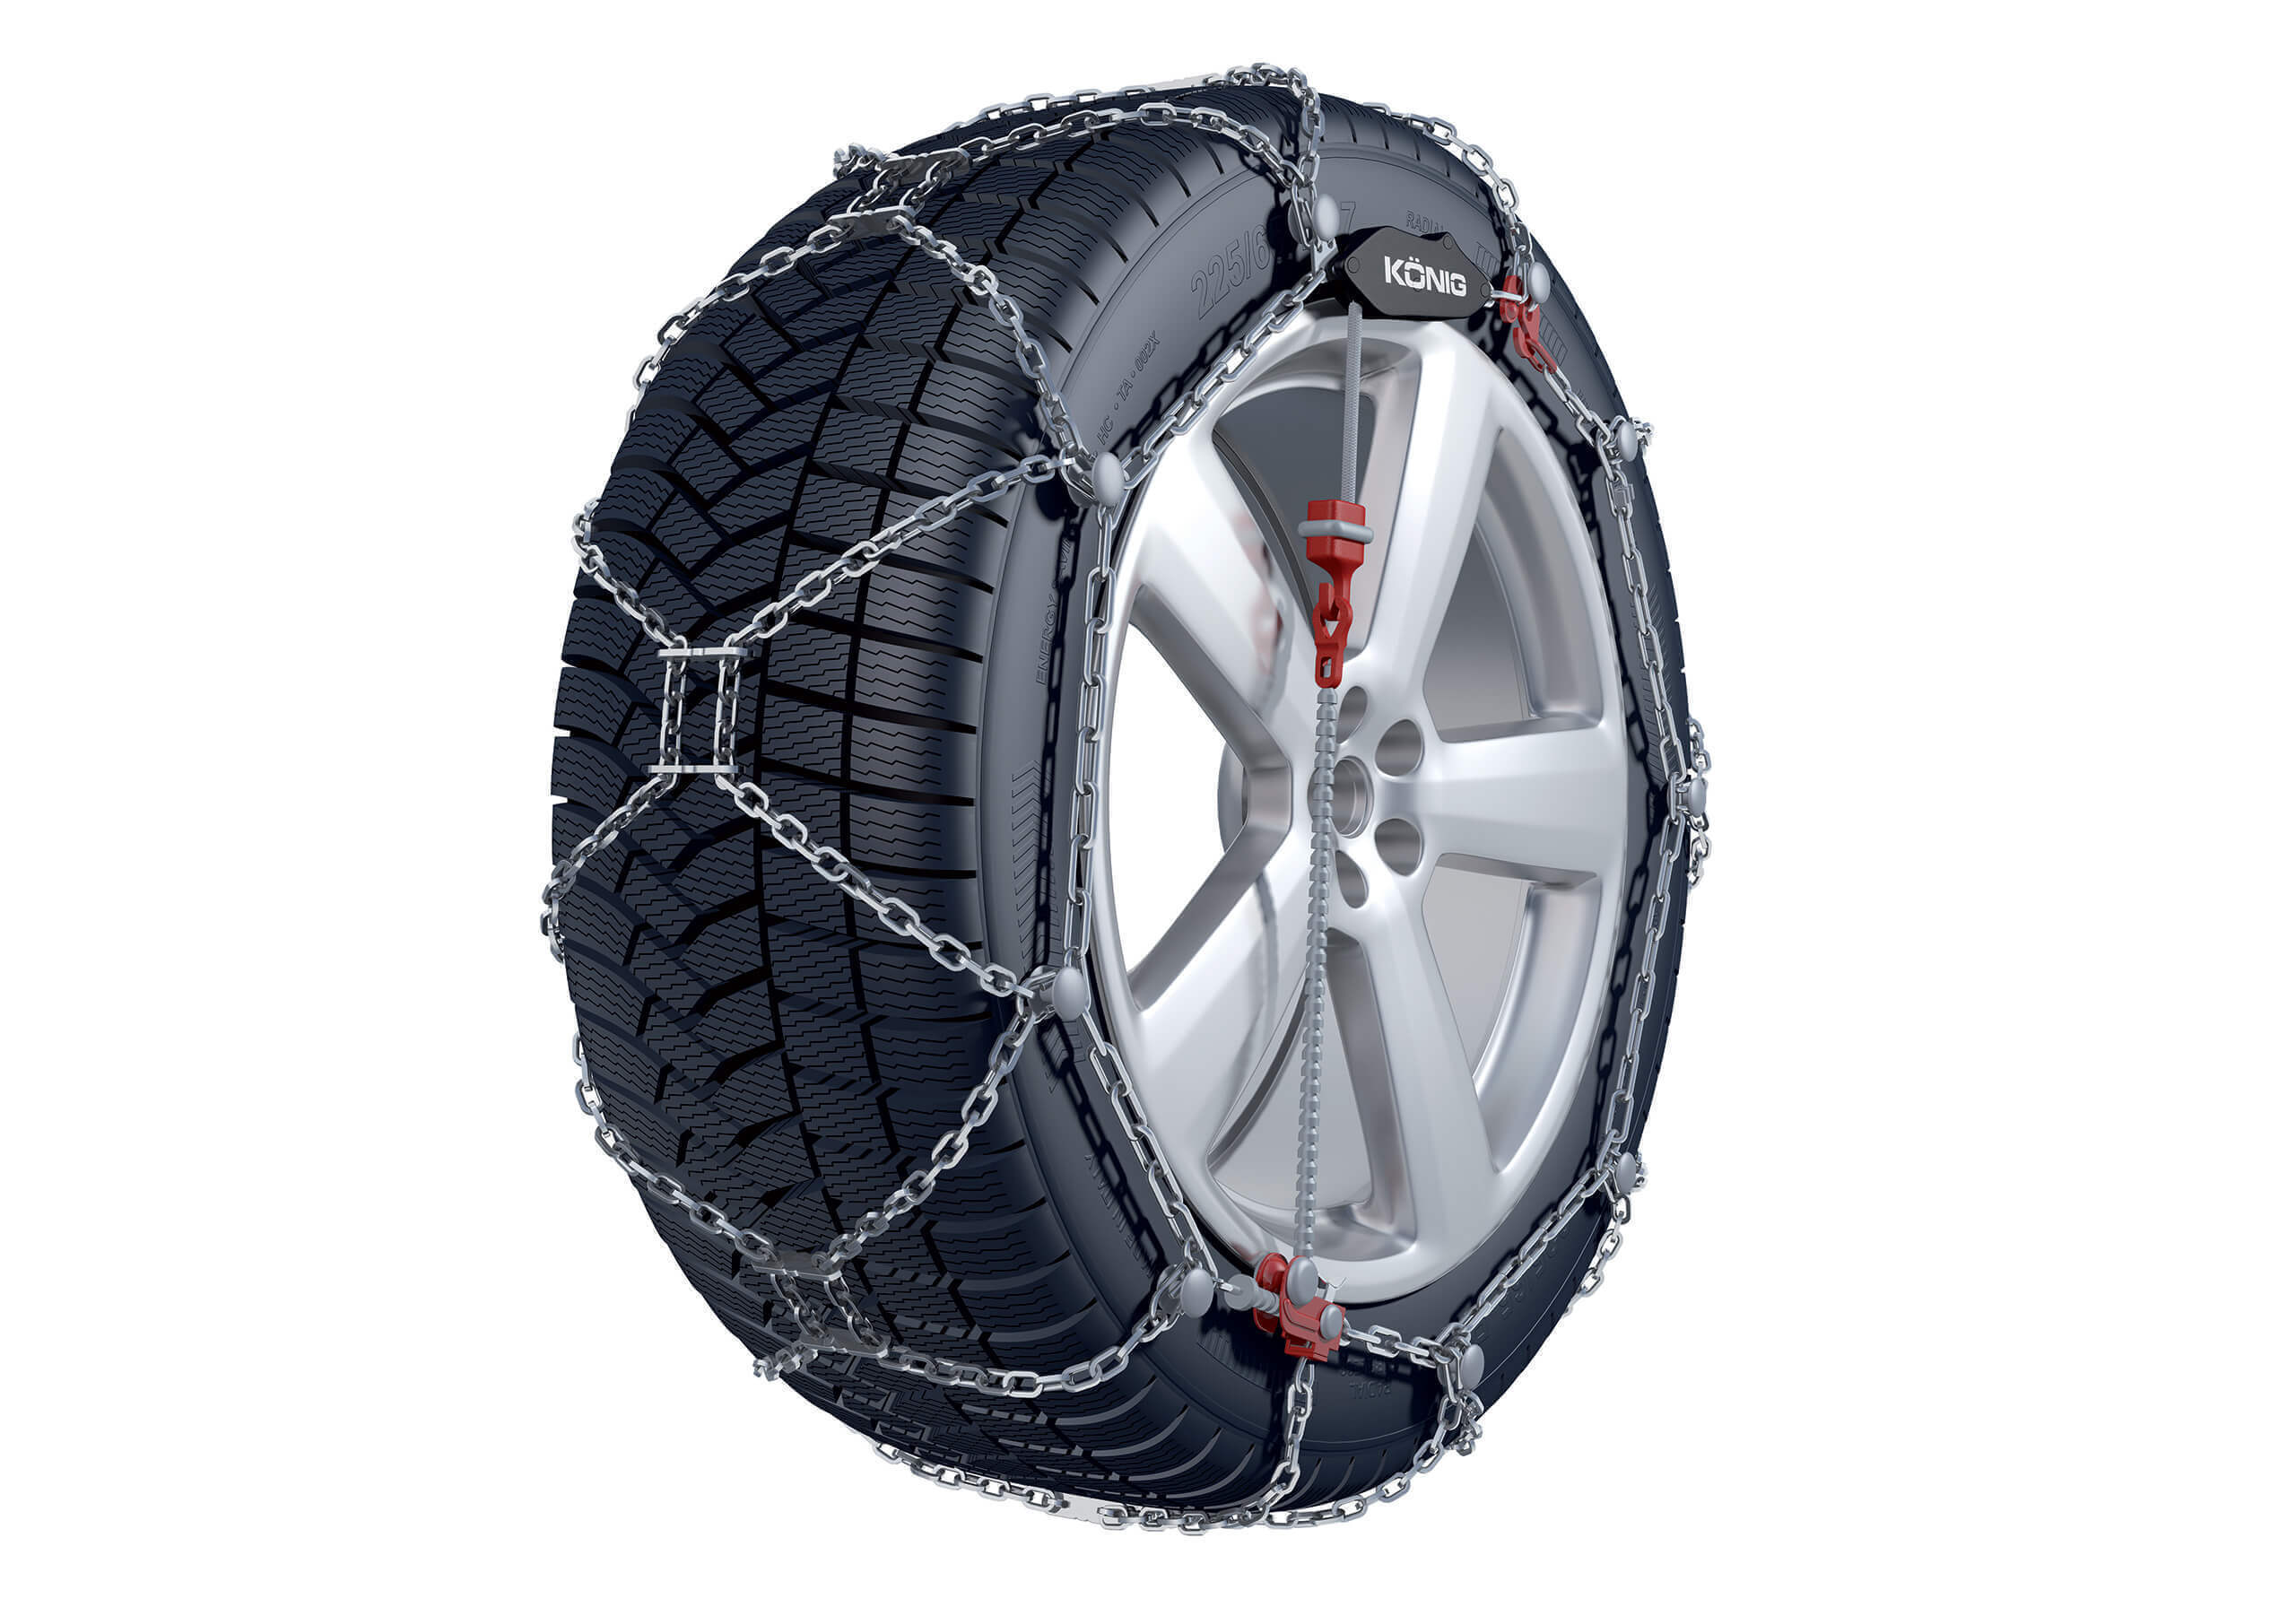 Iveco Daily L4 H3 (2006 to 2014):Knig XG-12 Pro snow chains (pair) no. KGXG-12 Pro 220